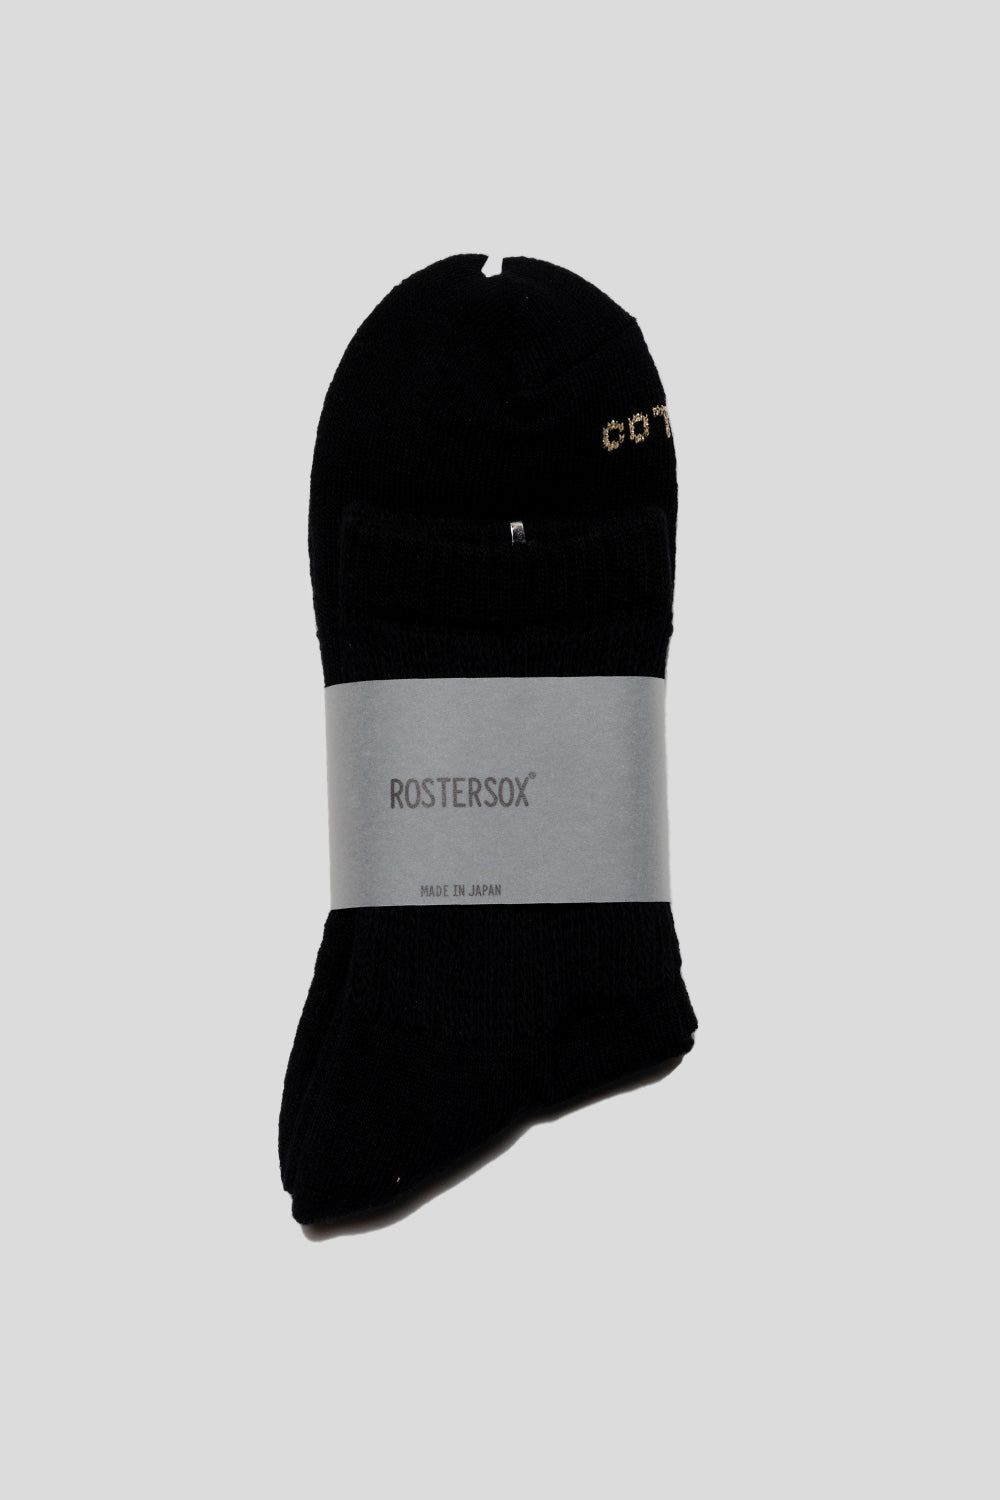 Rostersox Linen and Cotton Socks in Black